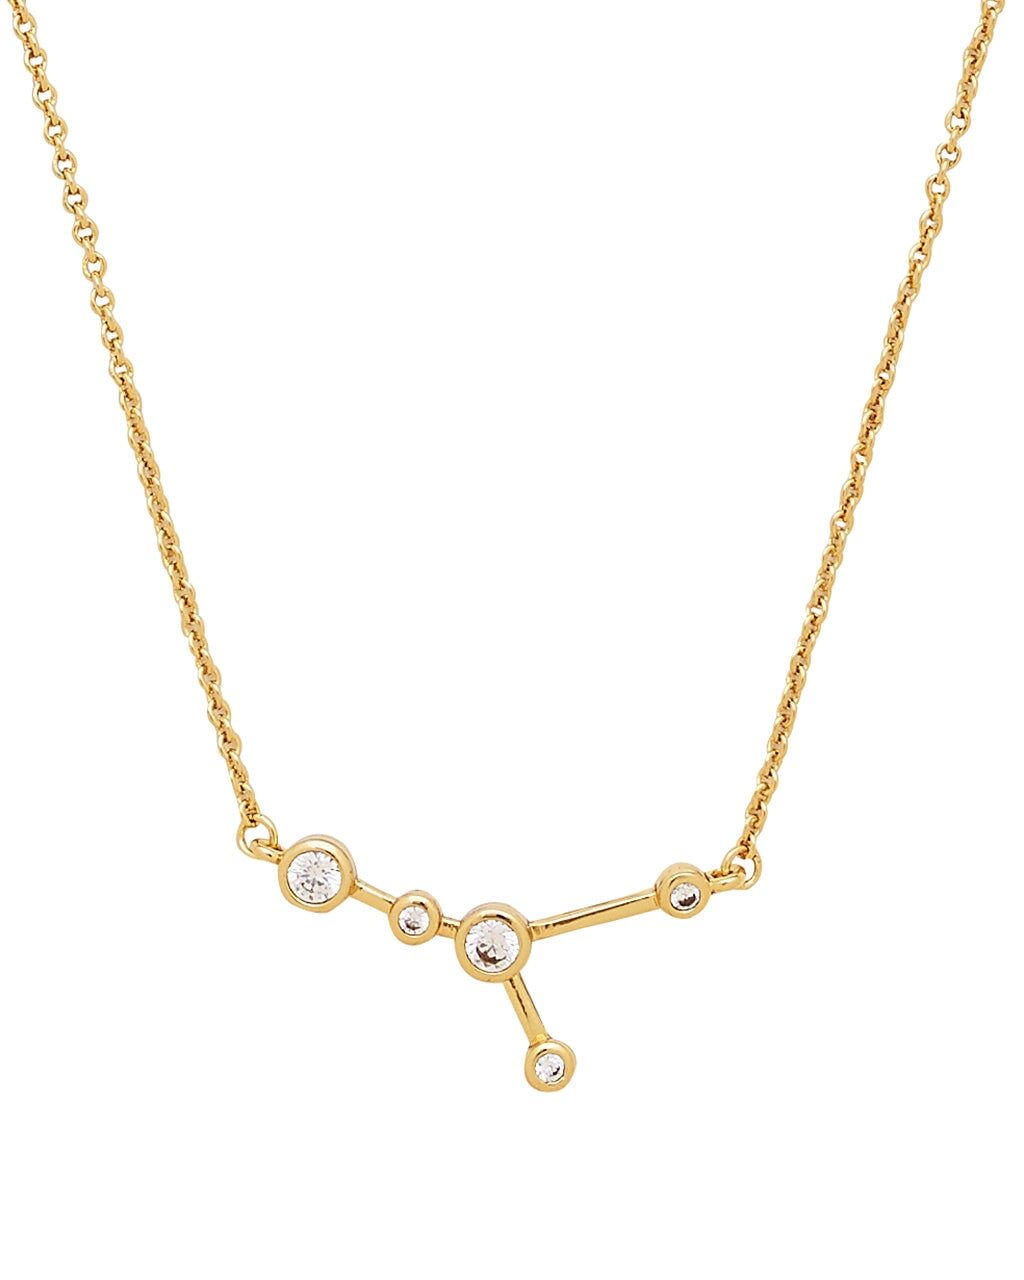 'When Stars Align' Constellation Necklace Necklace Sterling Forever Gold Cancer (Jun 21 - Jul 22) 